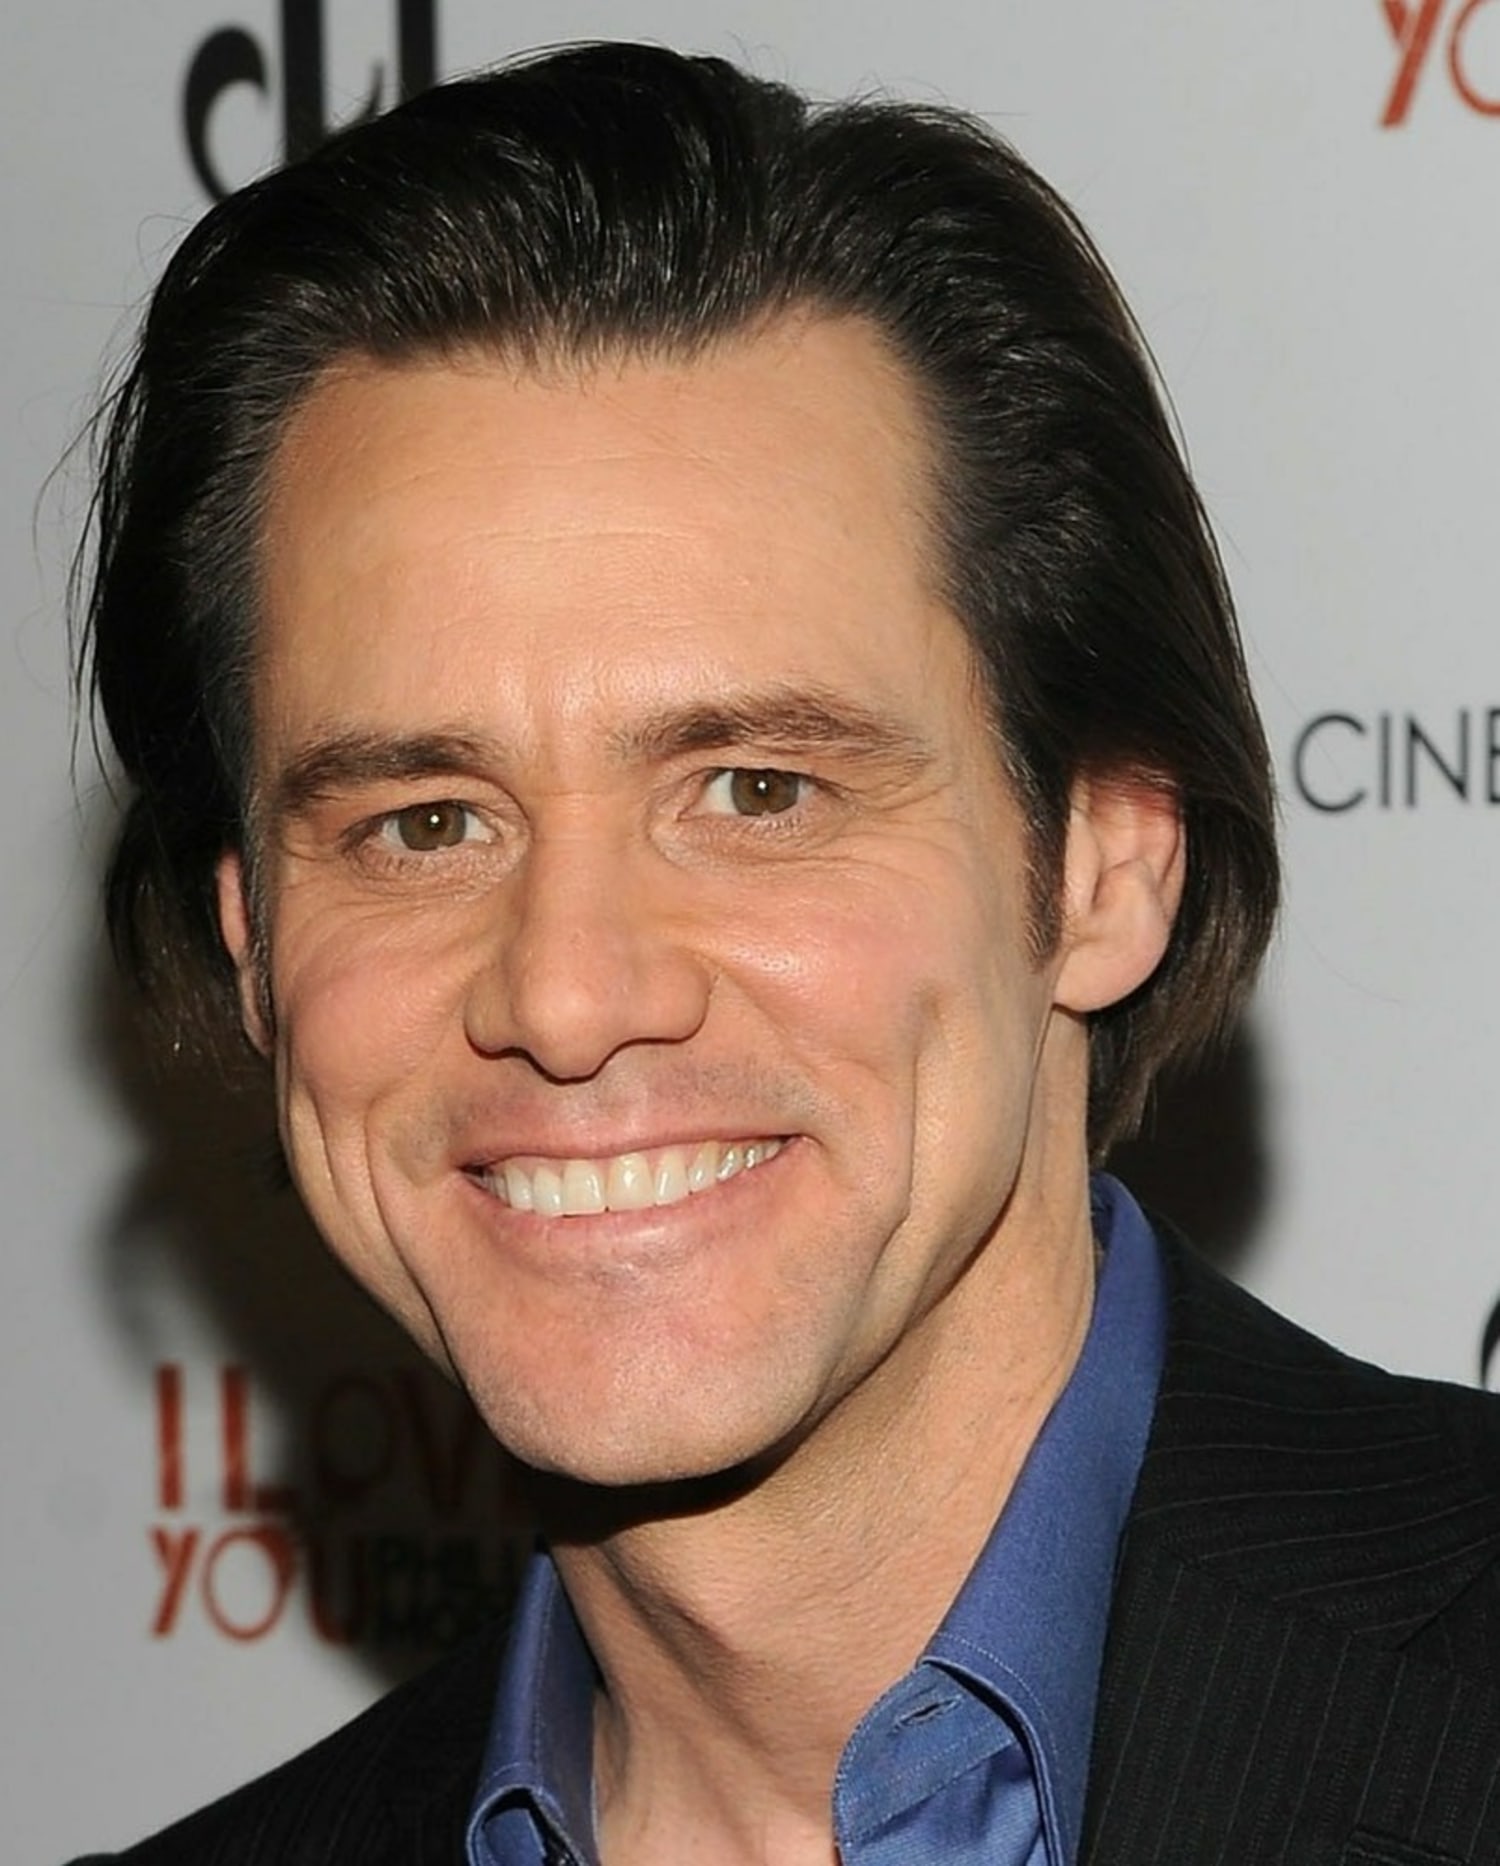 Clicky bits: Jim Carrey to join 'The Office'; 'Fallon' renewed